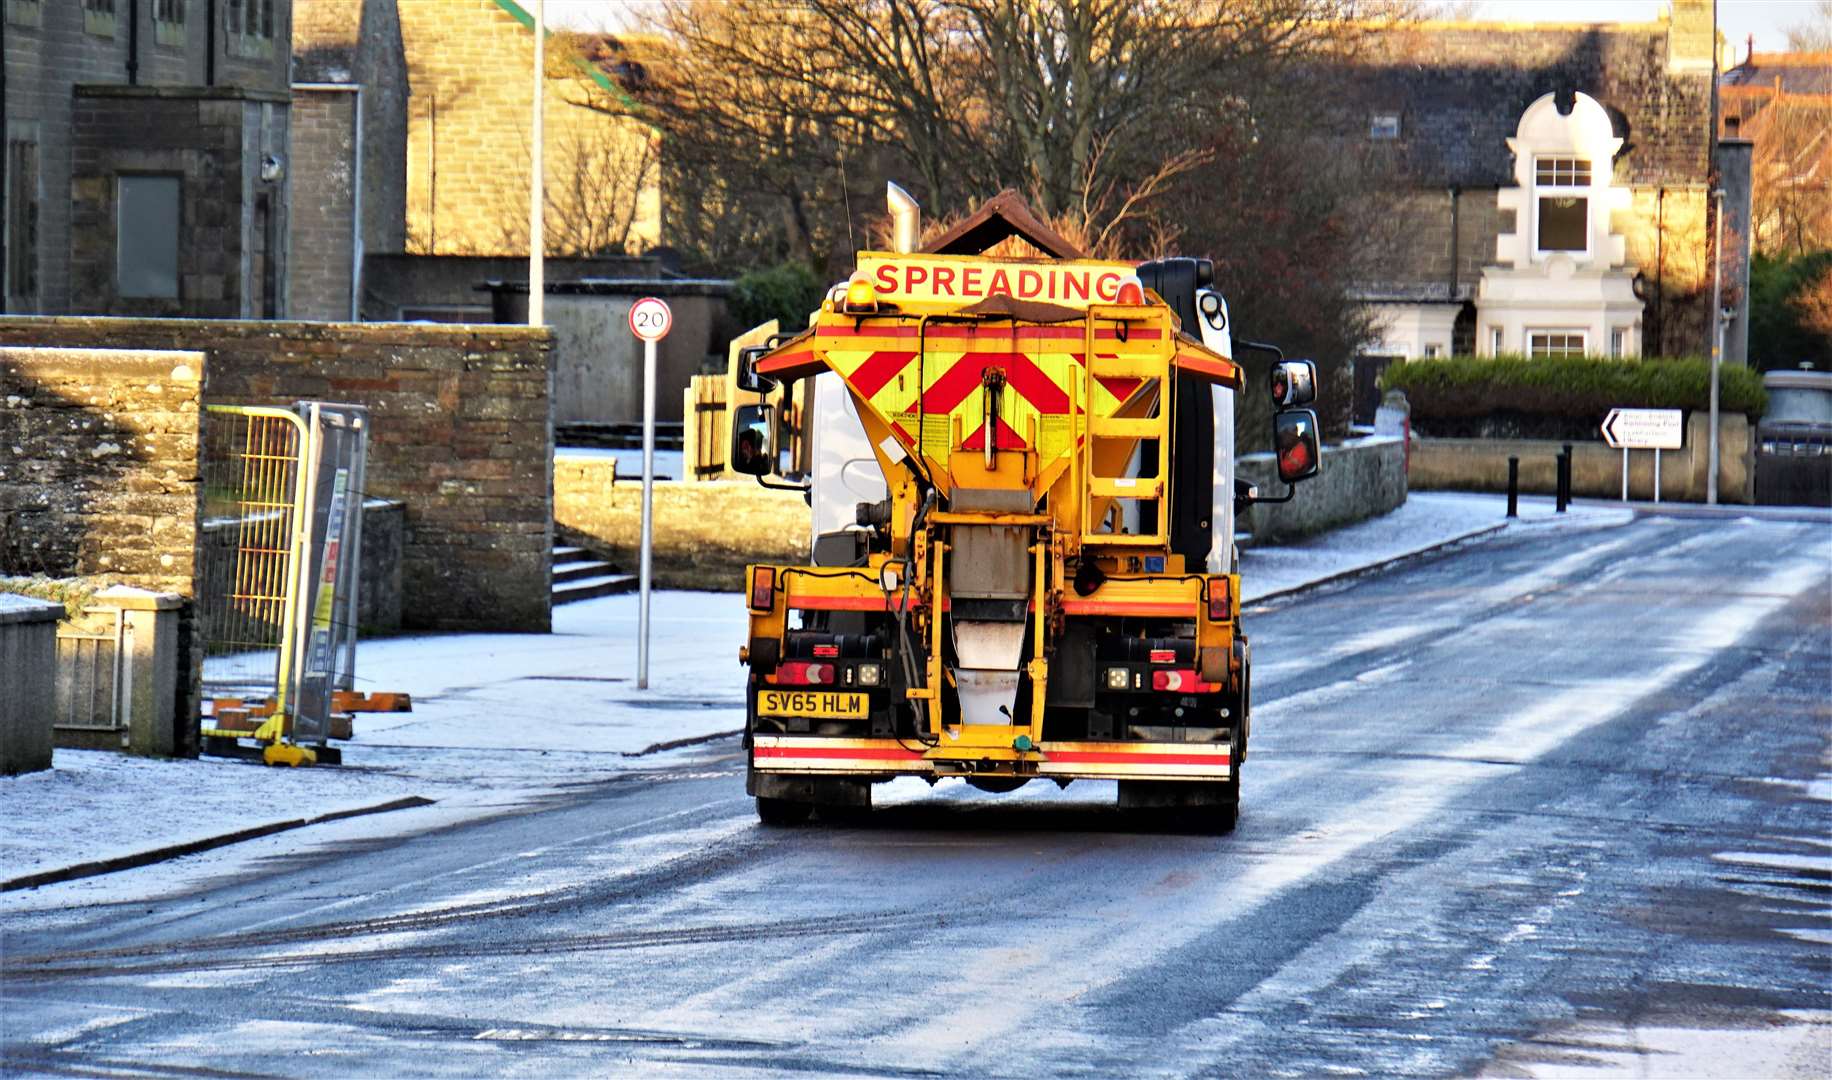 Council gritter operating on West Banks Avenue in Wick. Picture: DGS